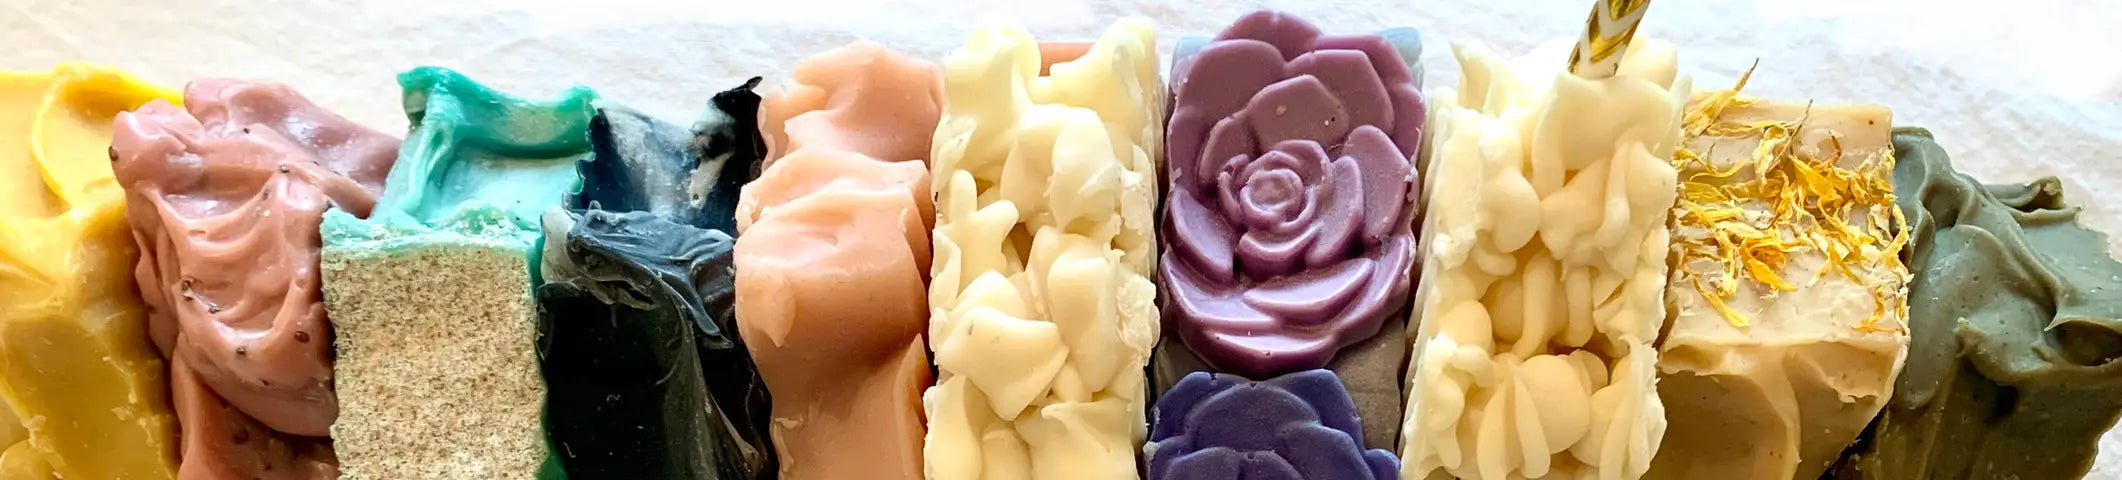 Handcrafted Healthy Soaps